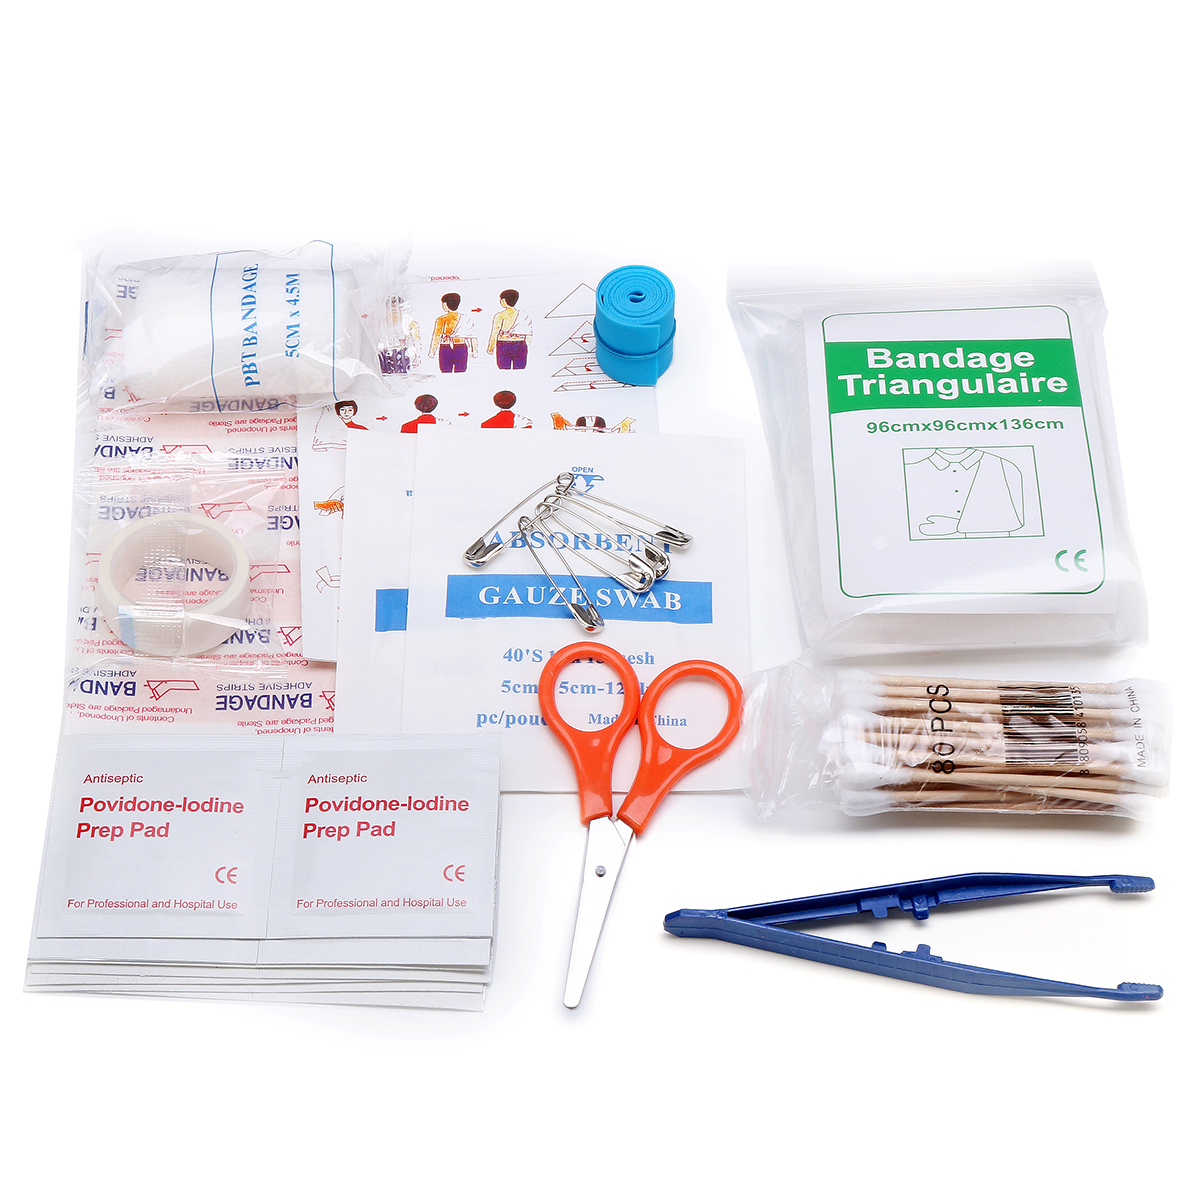 Emergency-First-Aid-Kit-79-Piece-Survival-Supplies-Bag-for-Car-Travel-Home-Emergency-Box-1420491